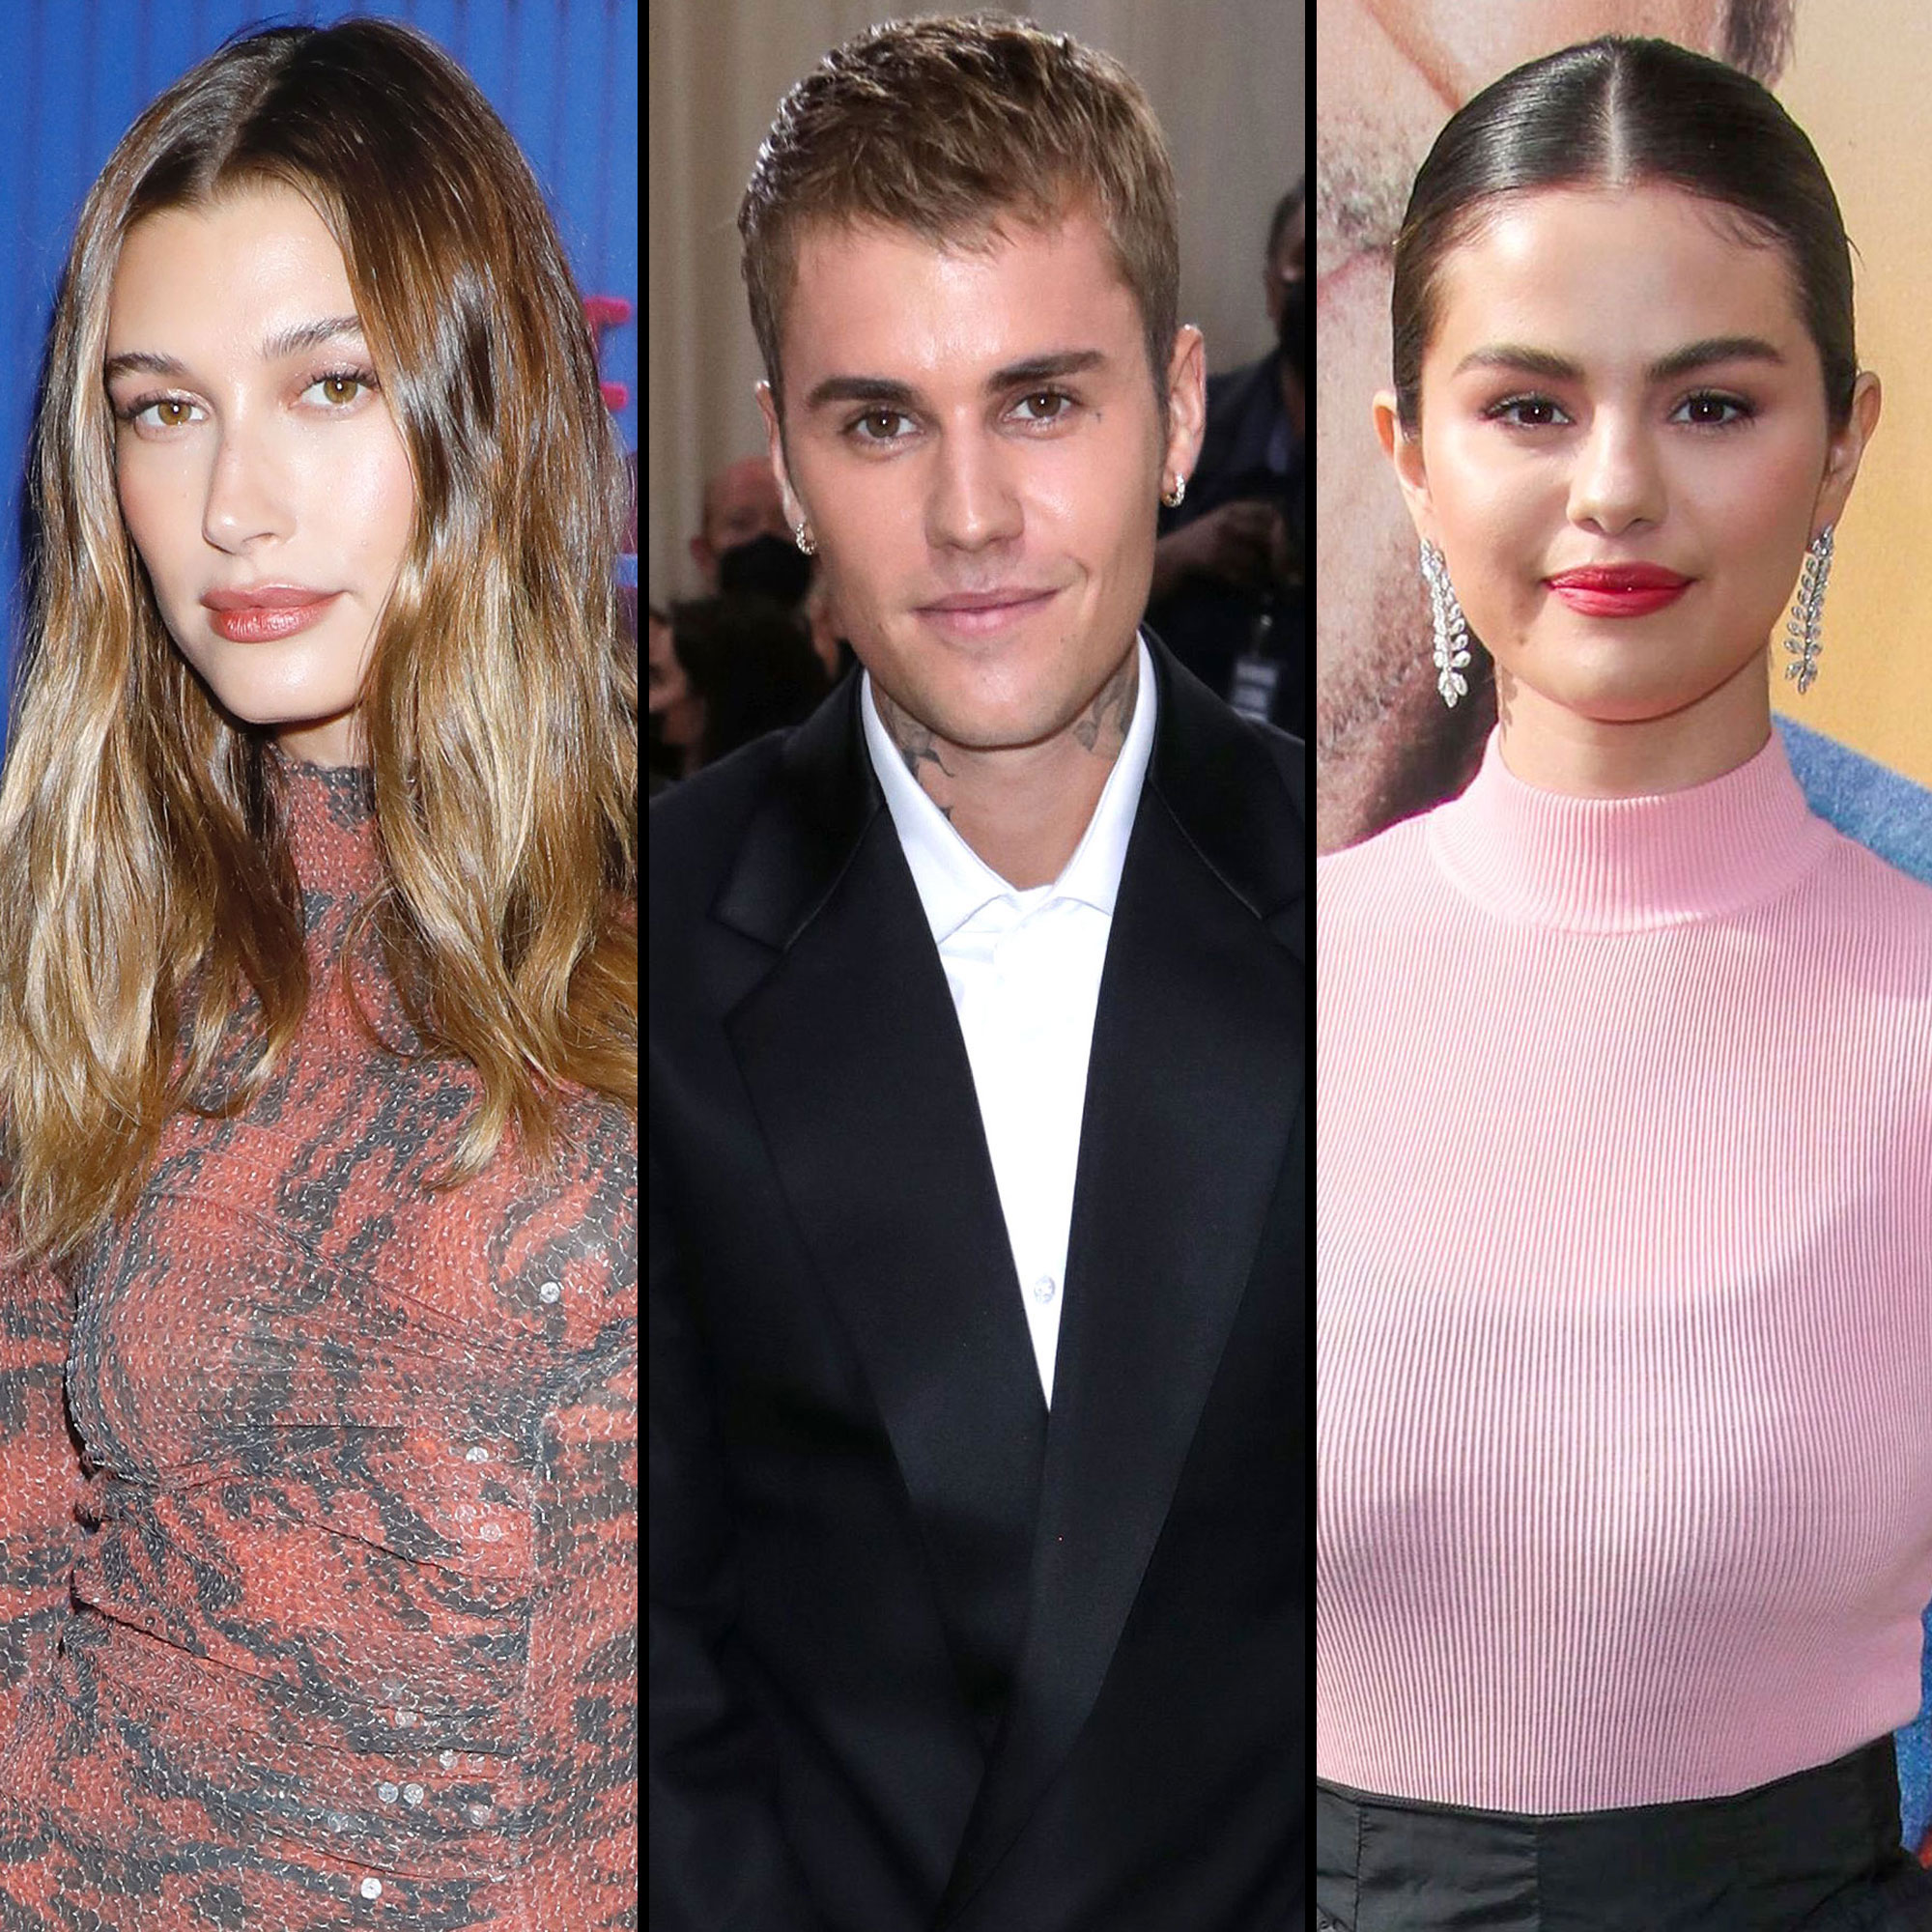 Hailey Bieber on Call Her Daddy Selena Gomez, More Revelations